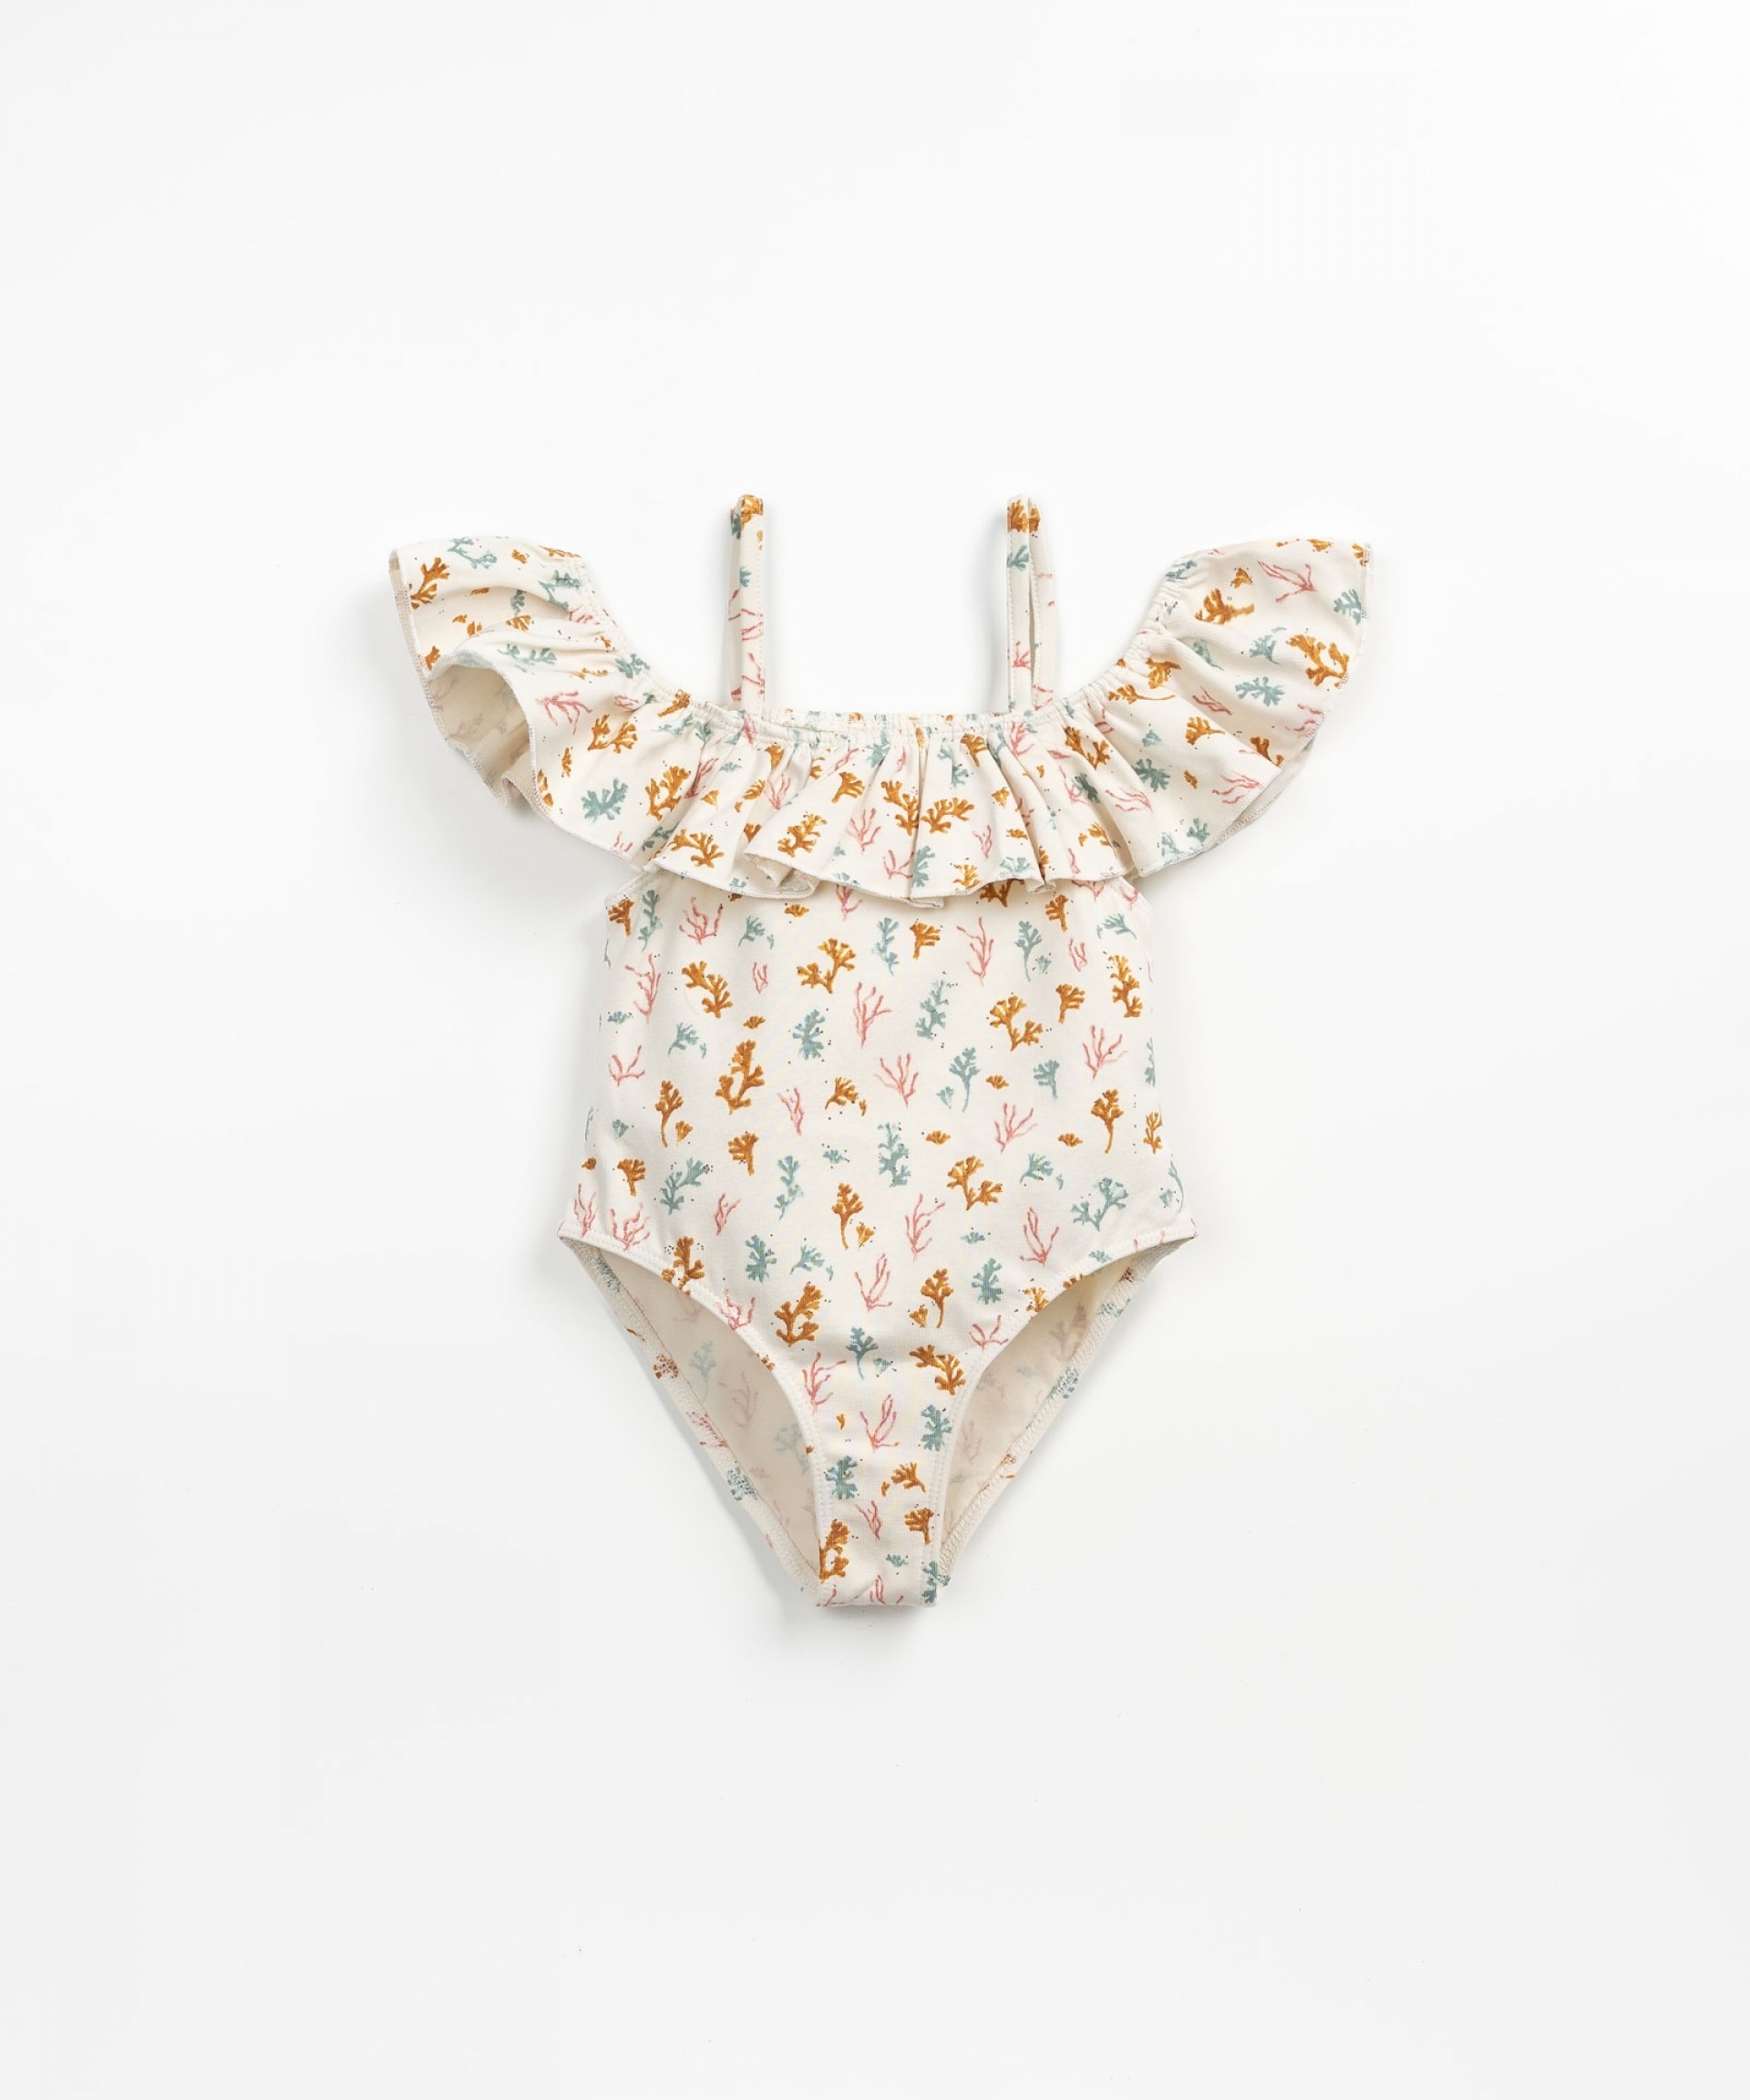 Swimsuit with seaweed print | Textile Art